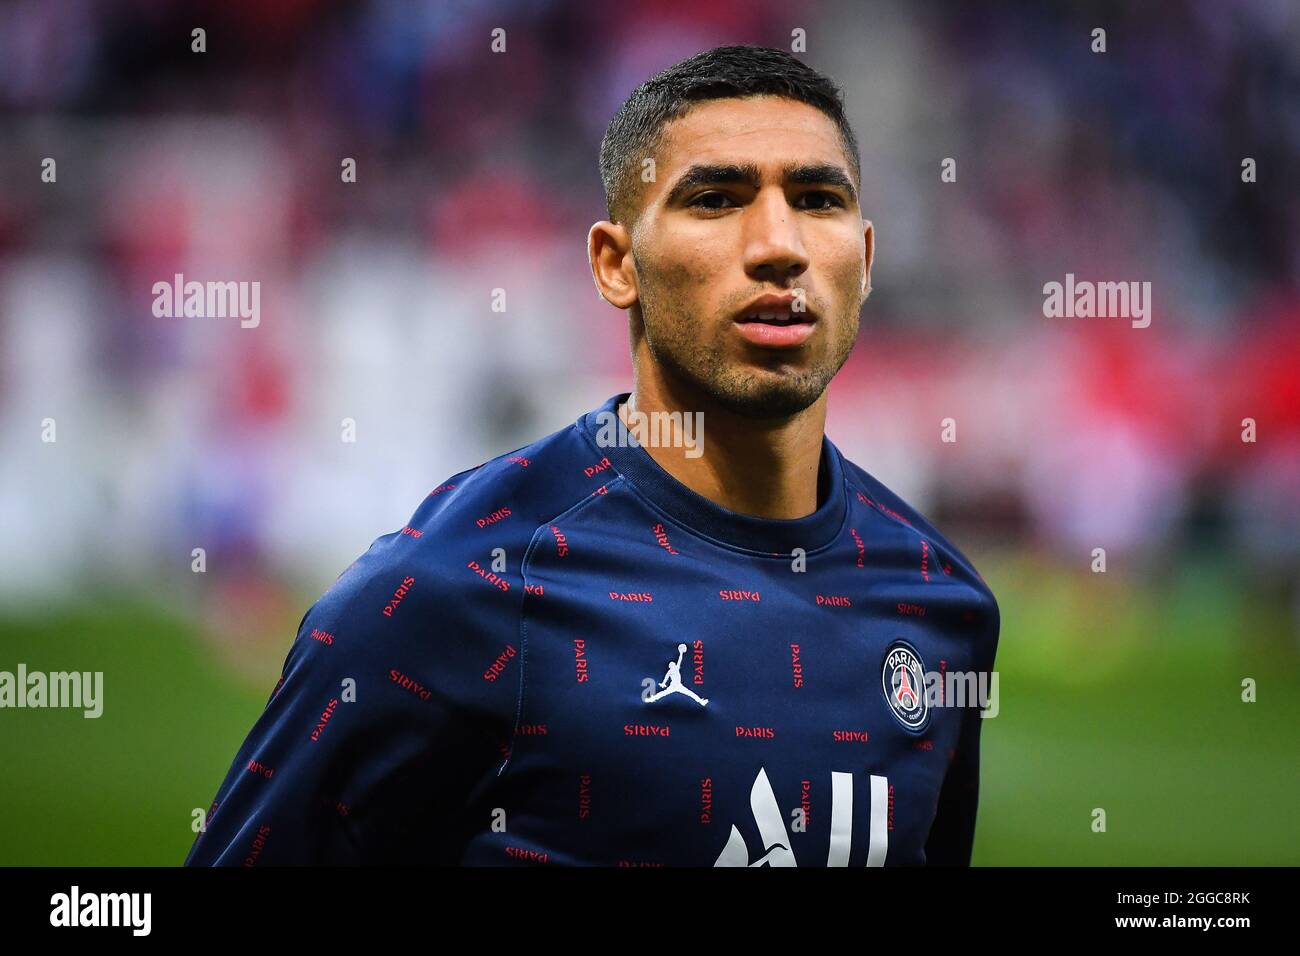 Reims, France, France. 29th Aug, 2021. Achraf HAKIMI of PSG during the Ligue 1 match between Paris Saint-Germain (PSG) and Stade Reims at Stade Auguste Delaune on August 29, 2021 in Reims, France. (Credit Image: © Matthieu Mirville/ZUMA Press Wire) Stock Photo